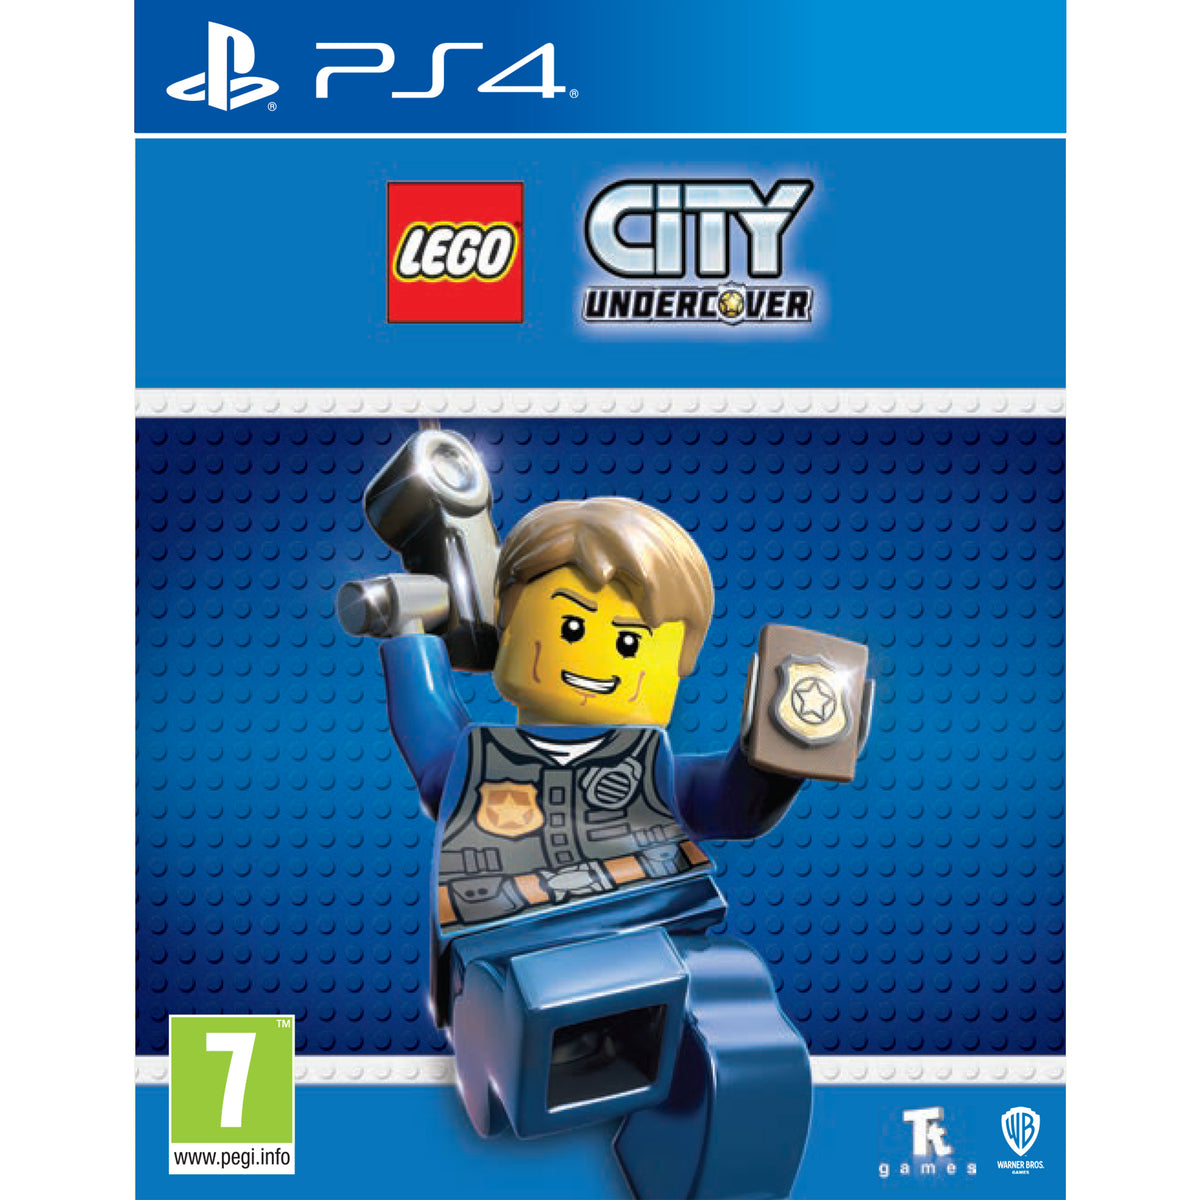 LEGO City Undercover - PS4 – Entertainment Go's Deal Of The Day!